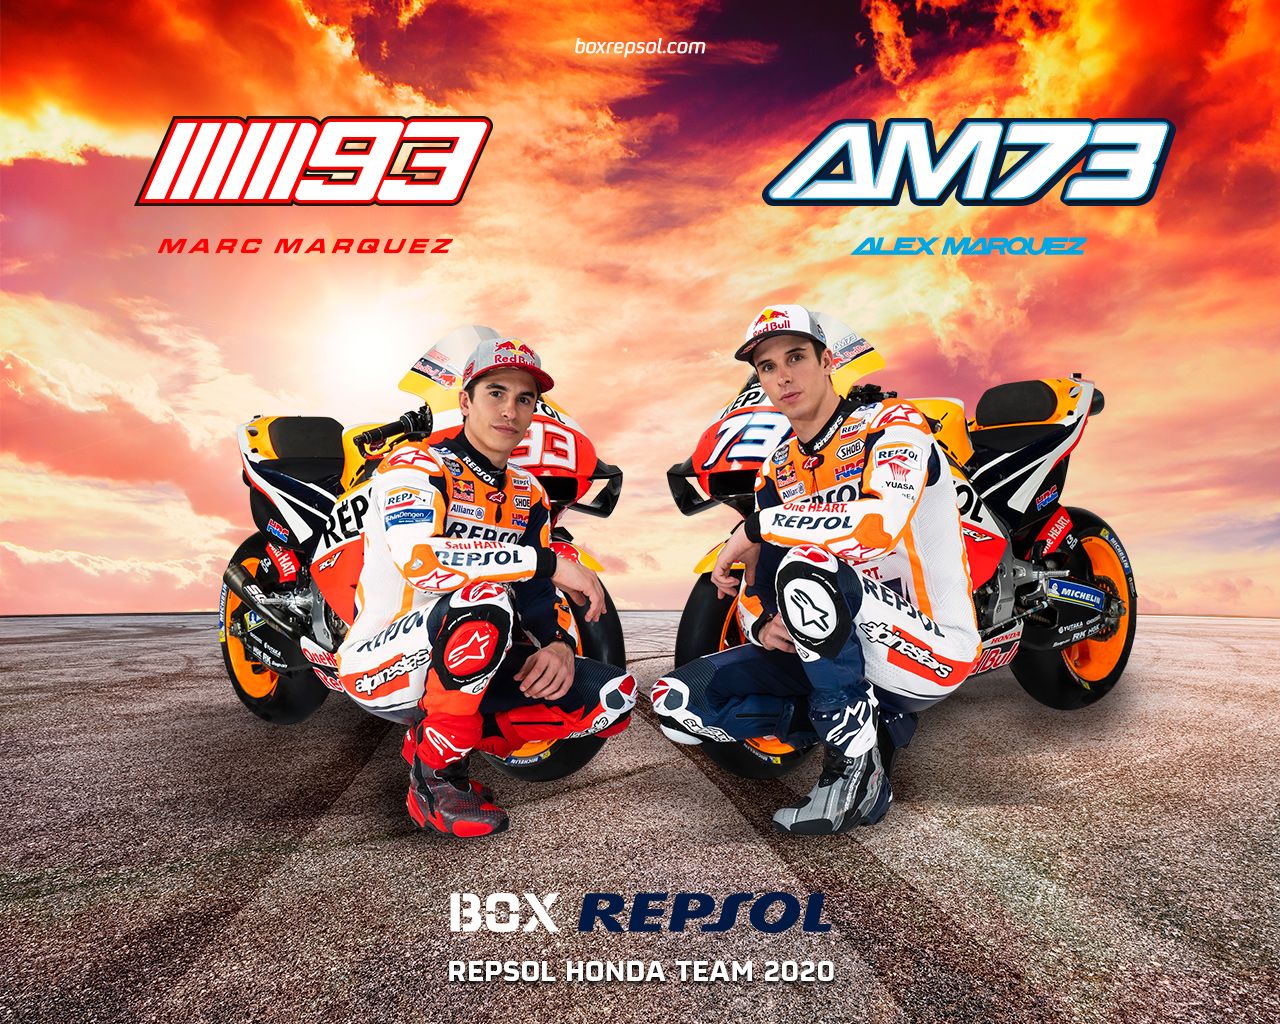 MotoGP and Trial wallpaper and other downloads